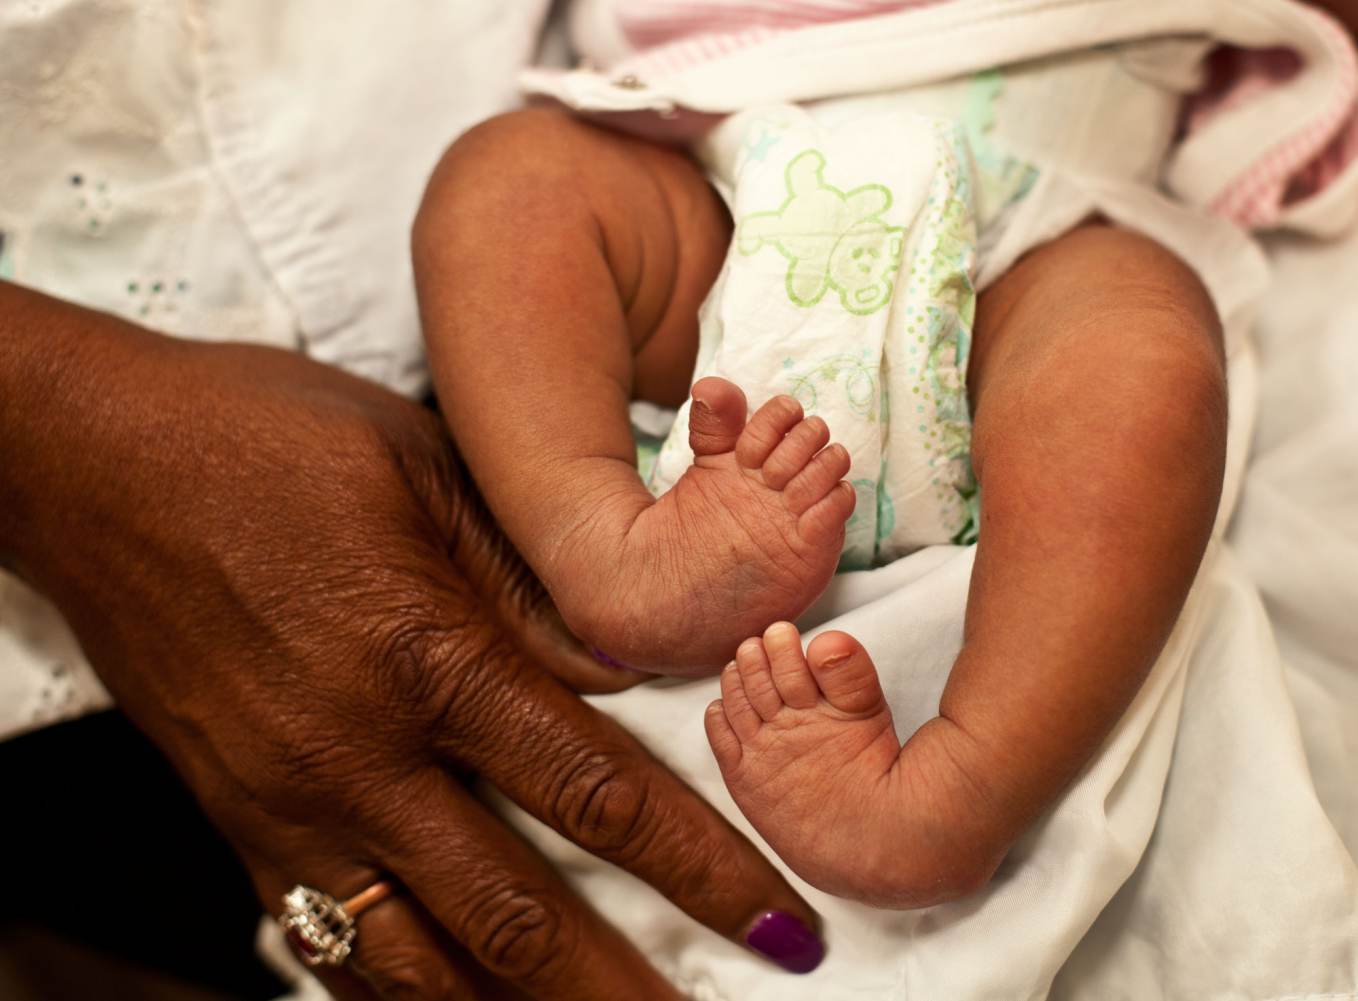 Global Strategy to End Clubfoot Disability 2030 Launched on World